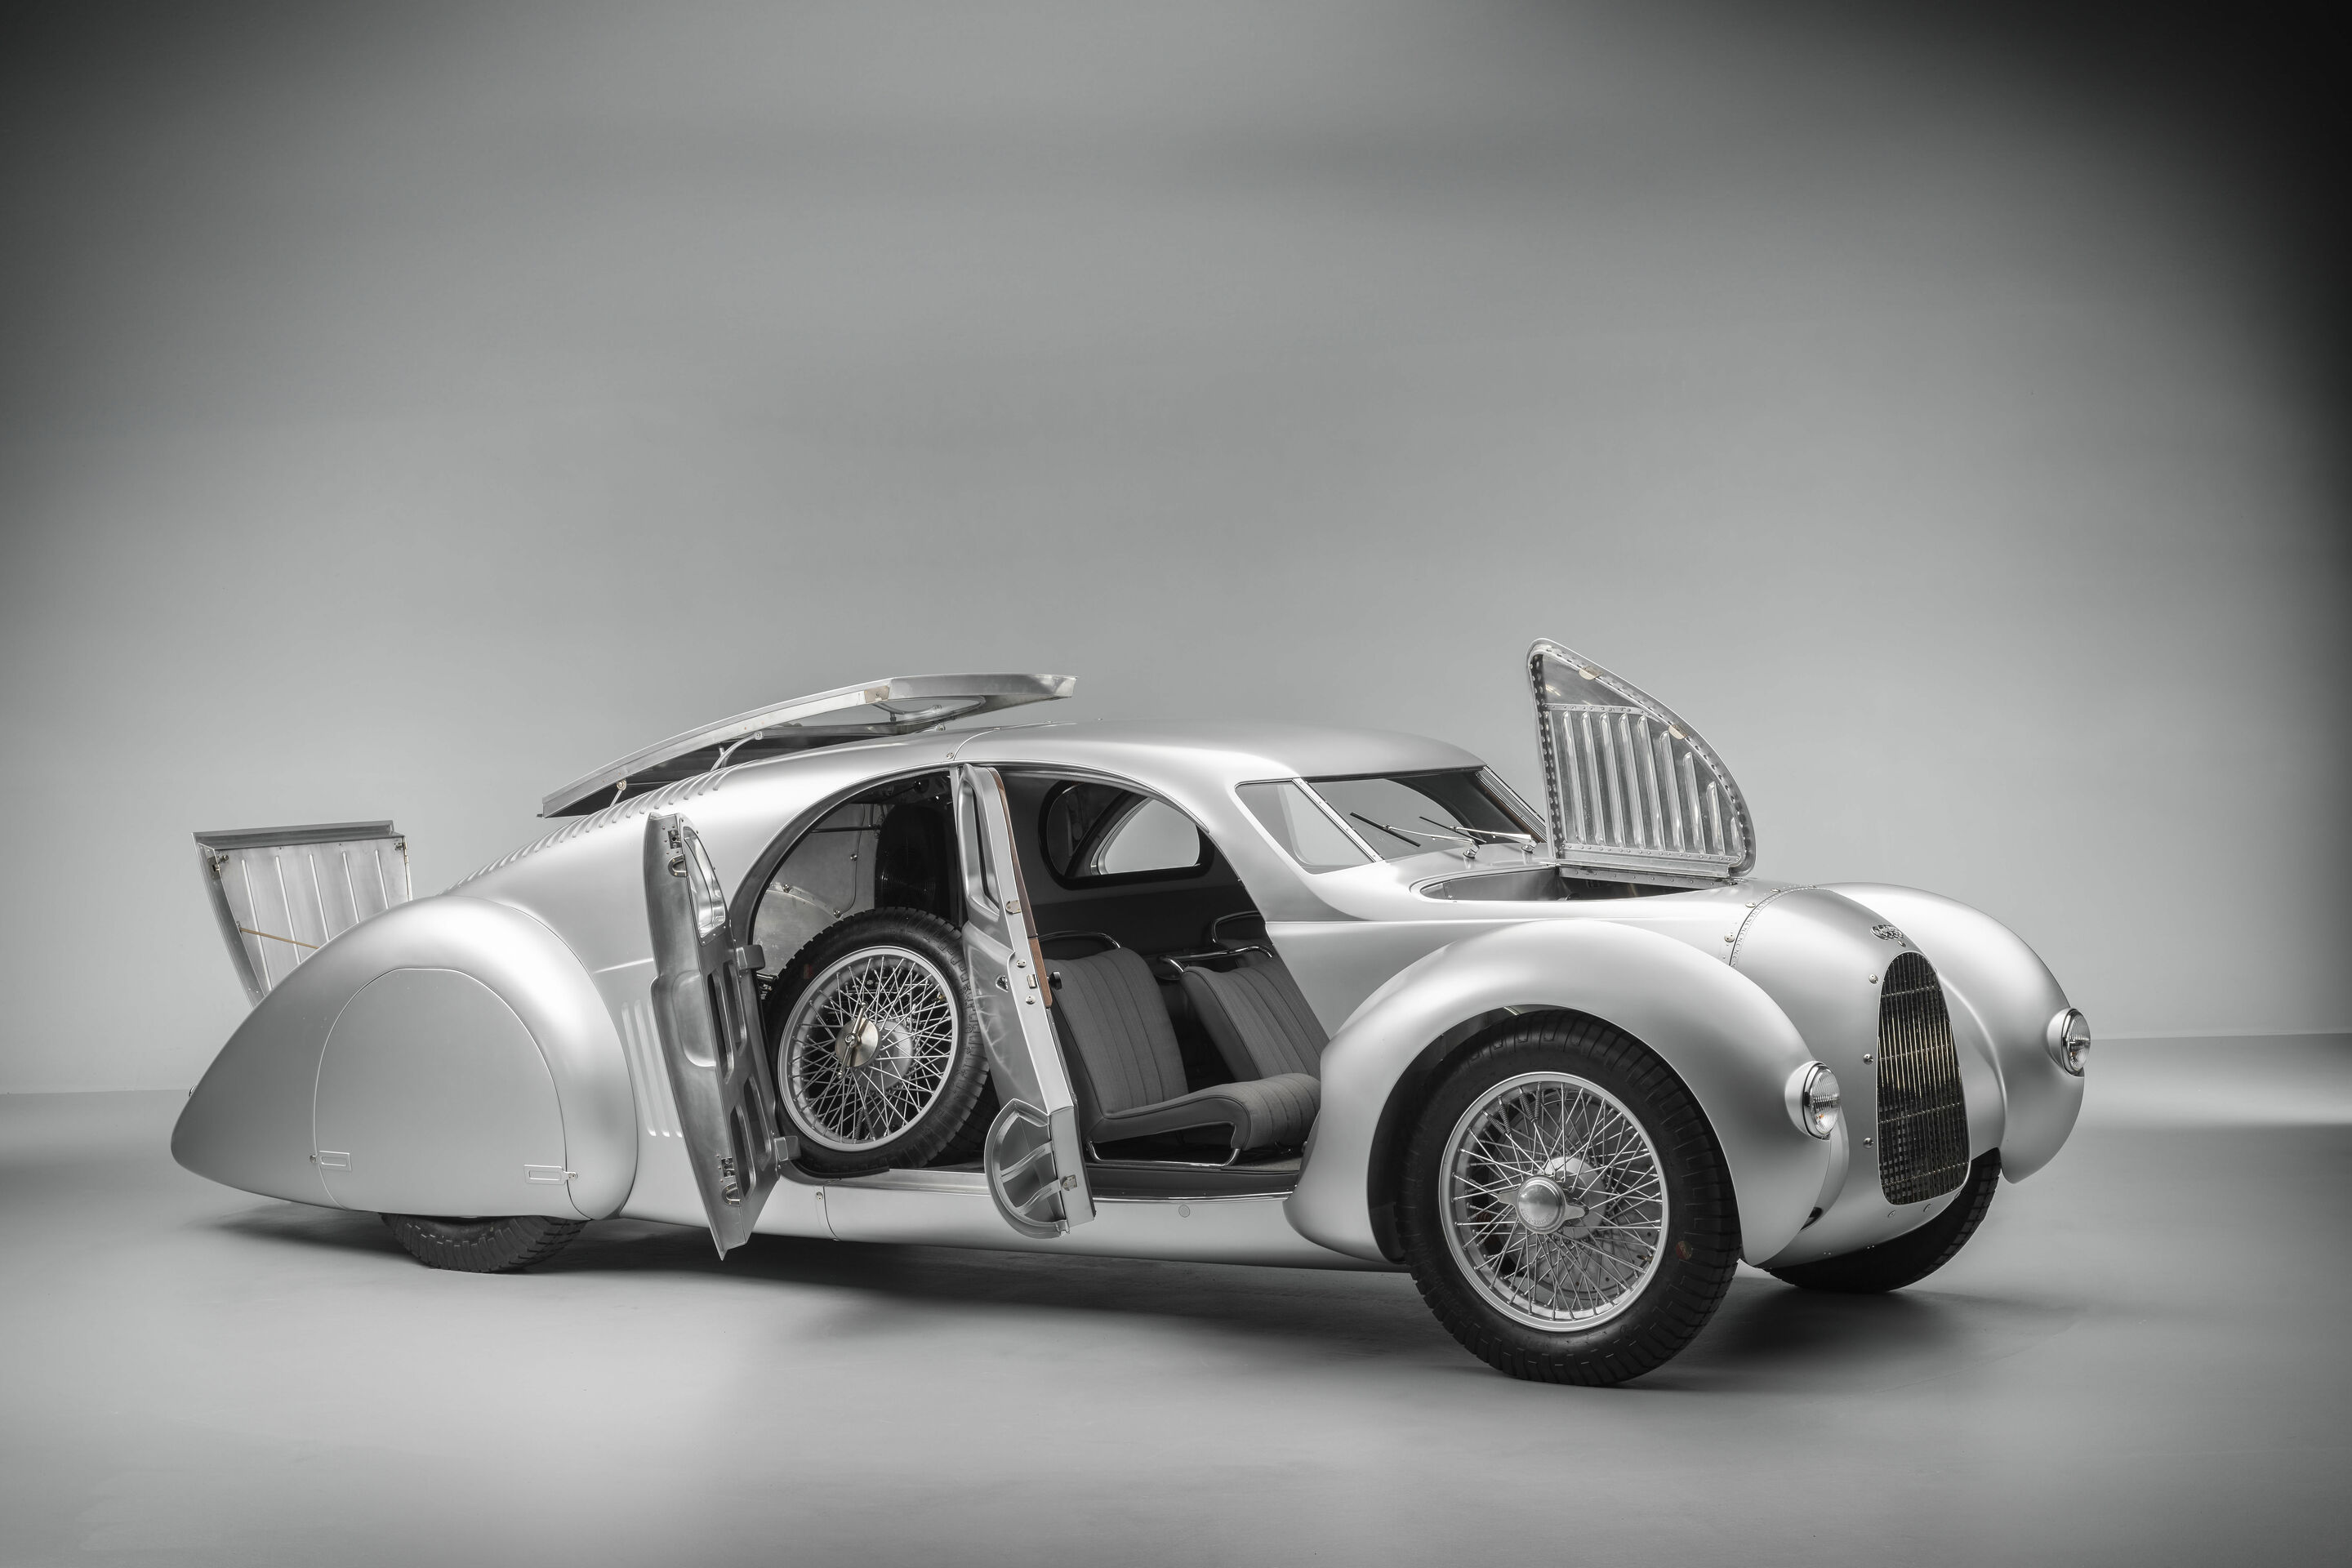 Imagined over 90 years ago, now brought to life: Audi Tradition presents the Auto Union Type 52